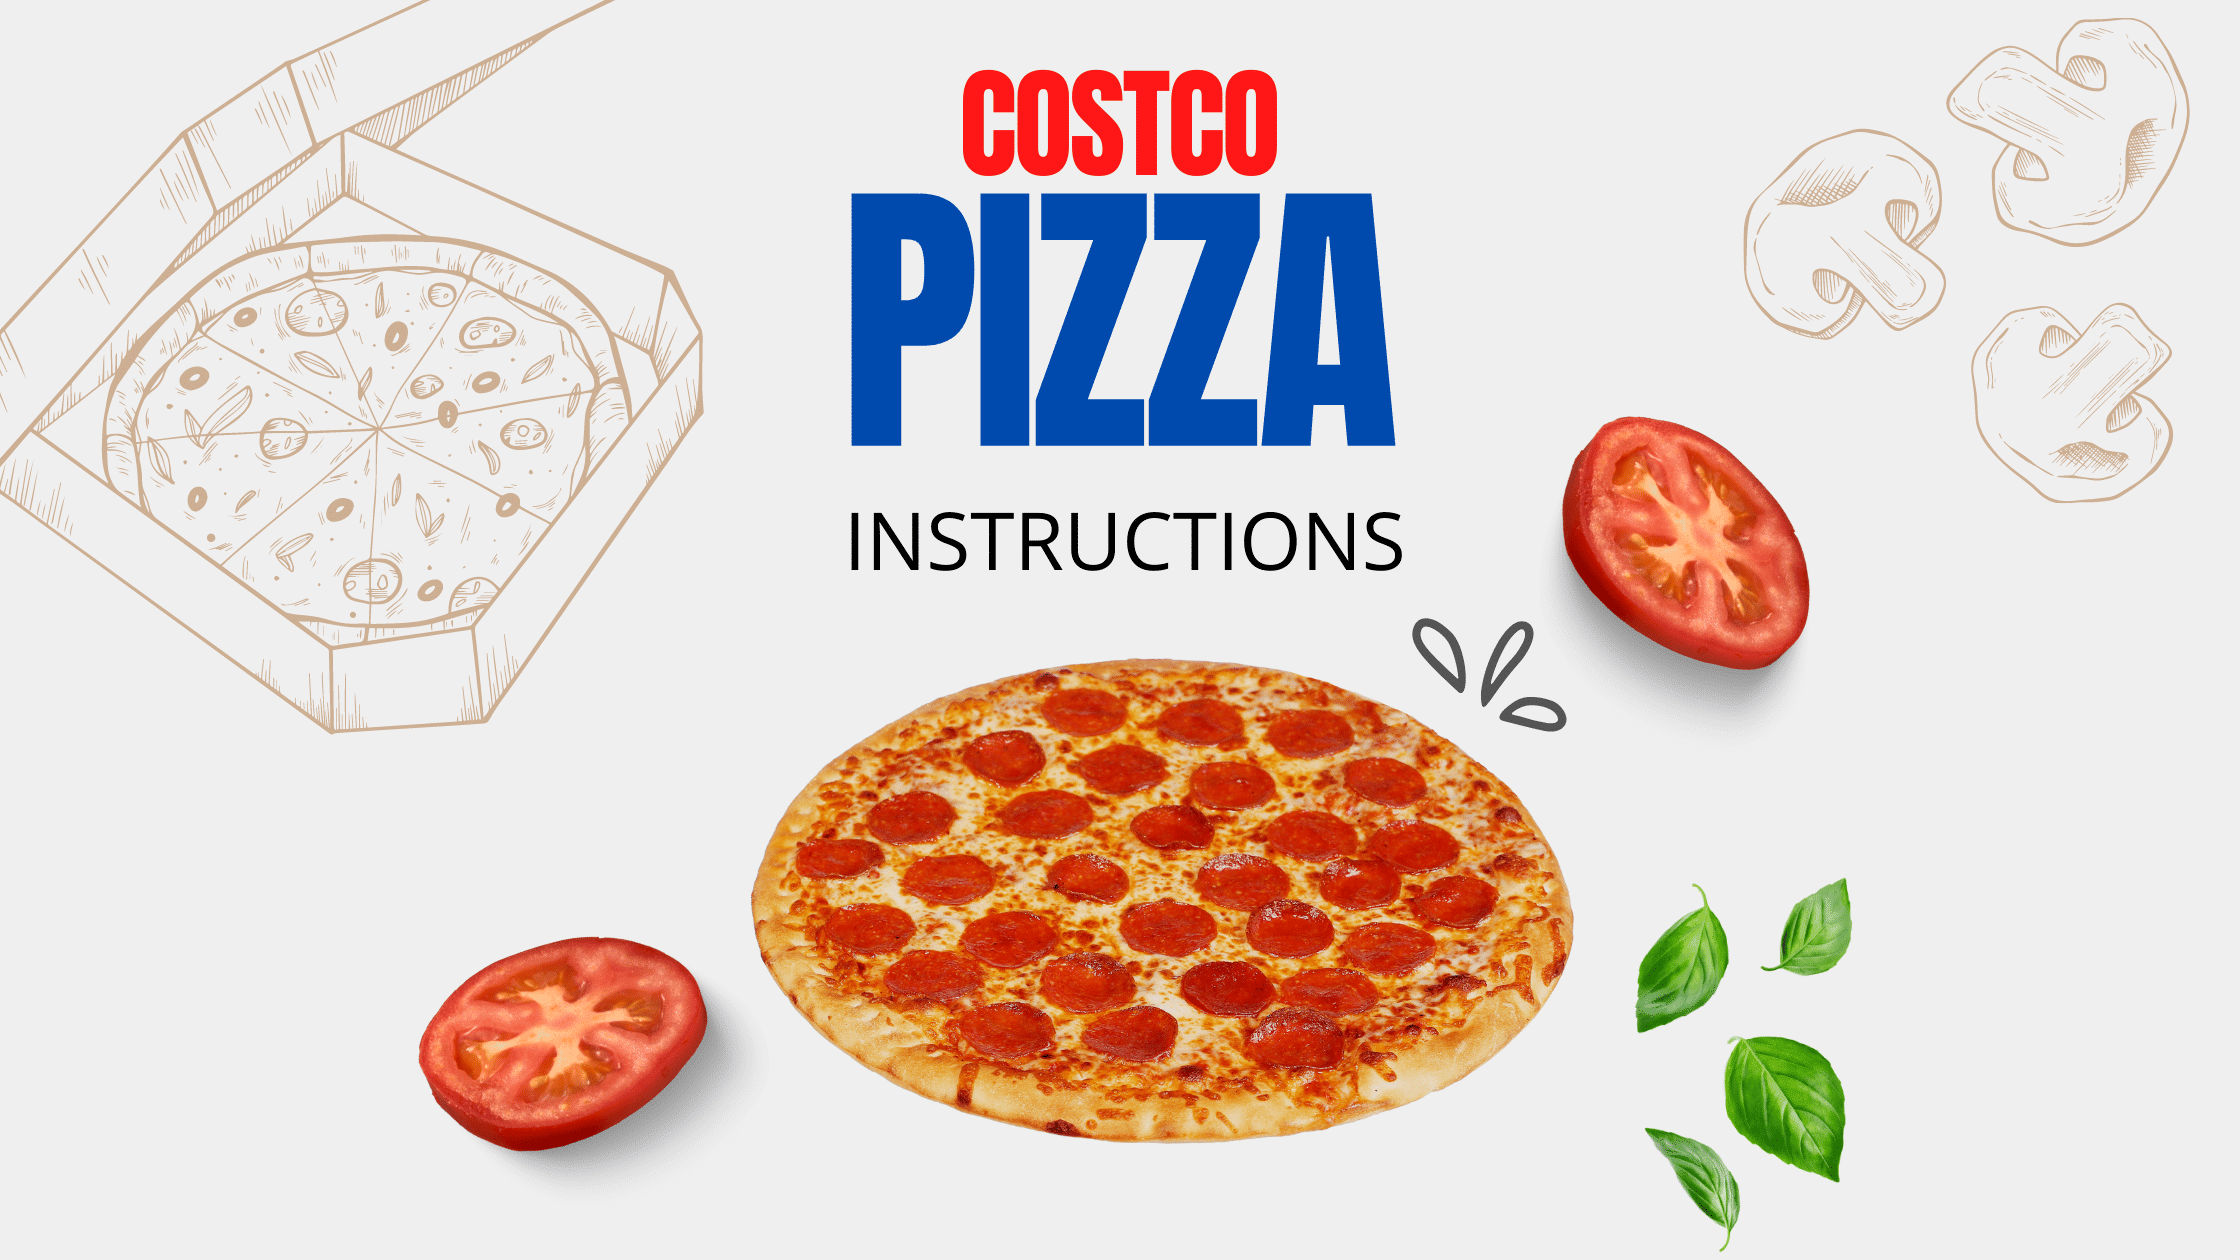 Costco Pizza Instructions: A Step-by-Step Process to the Best Pizza!